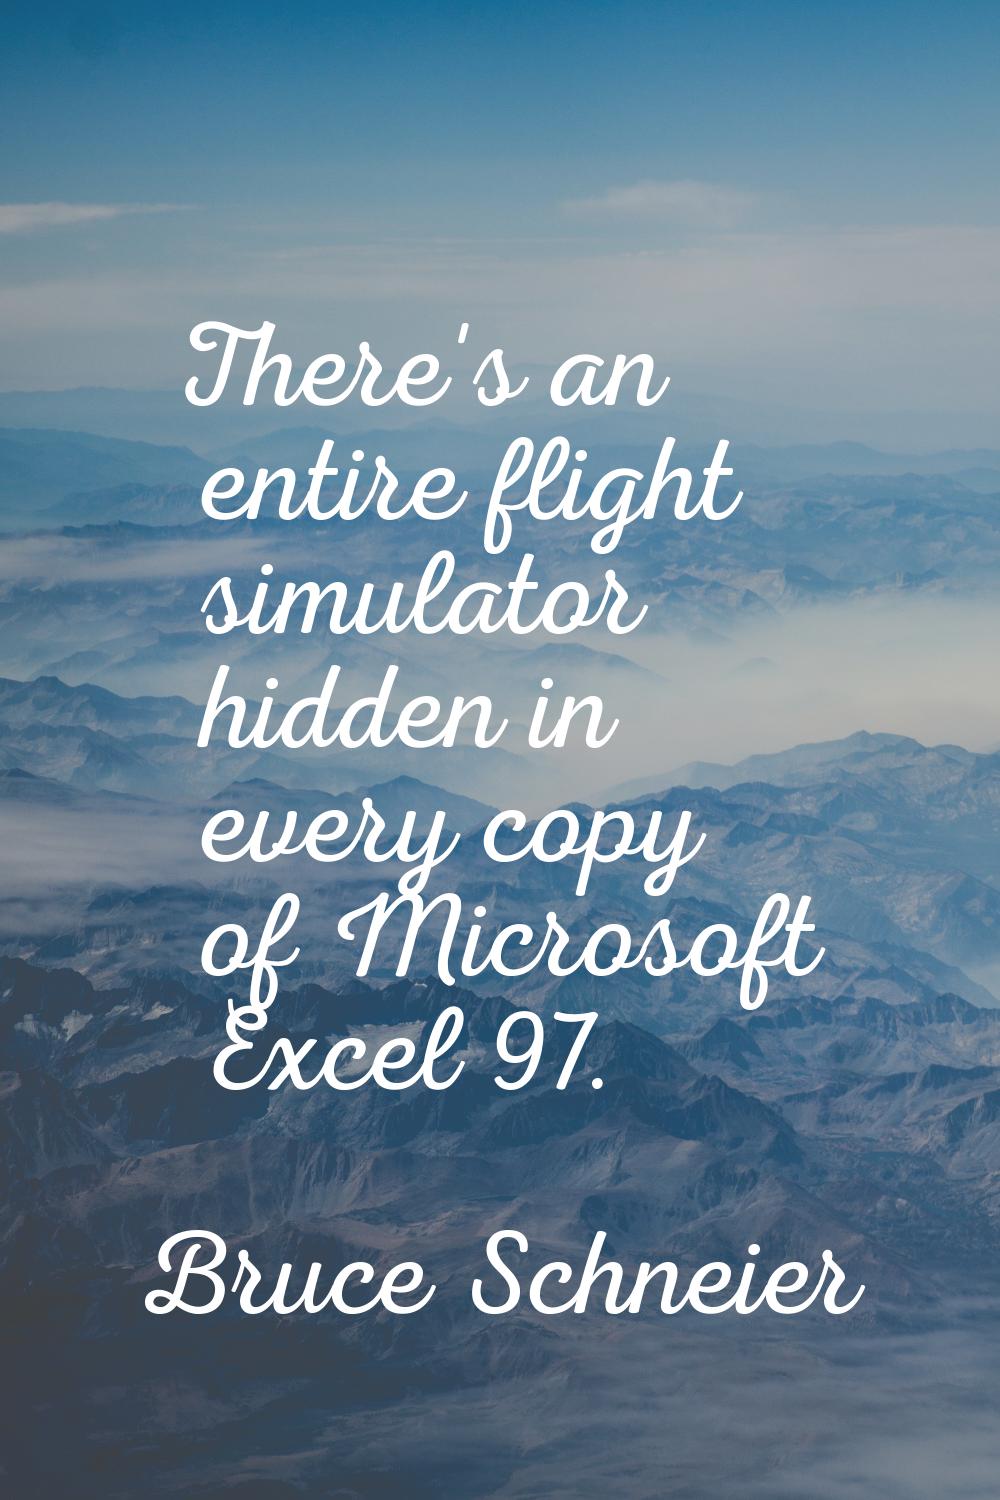 There's an entire flight simulator hidden in every copy of Microsoft Excel 97.